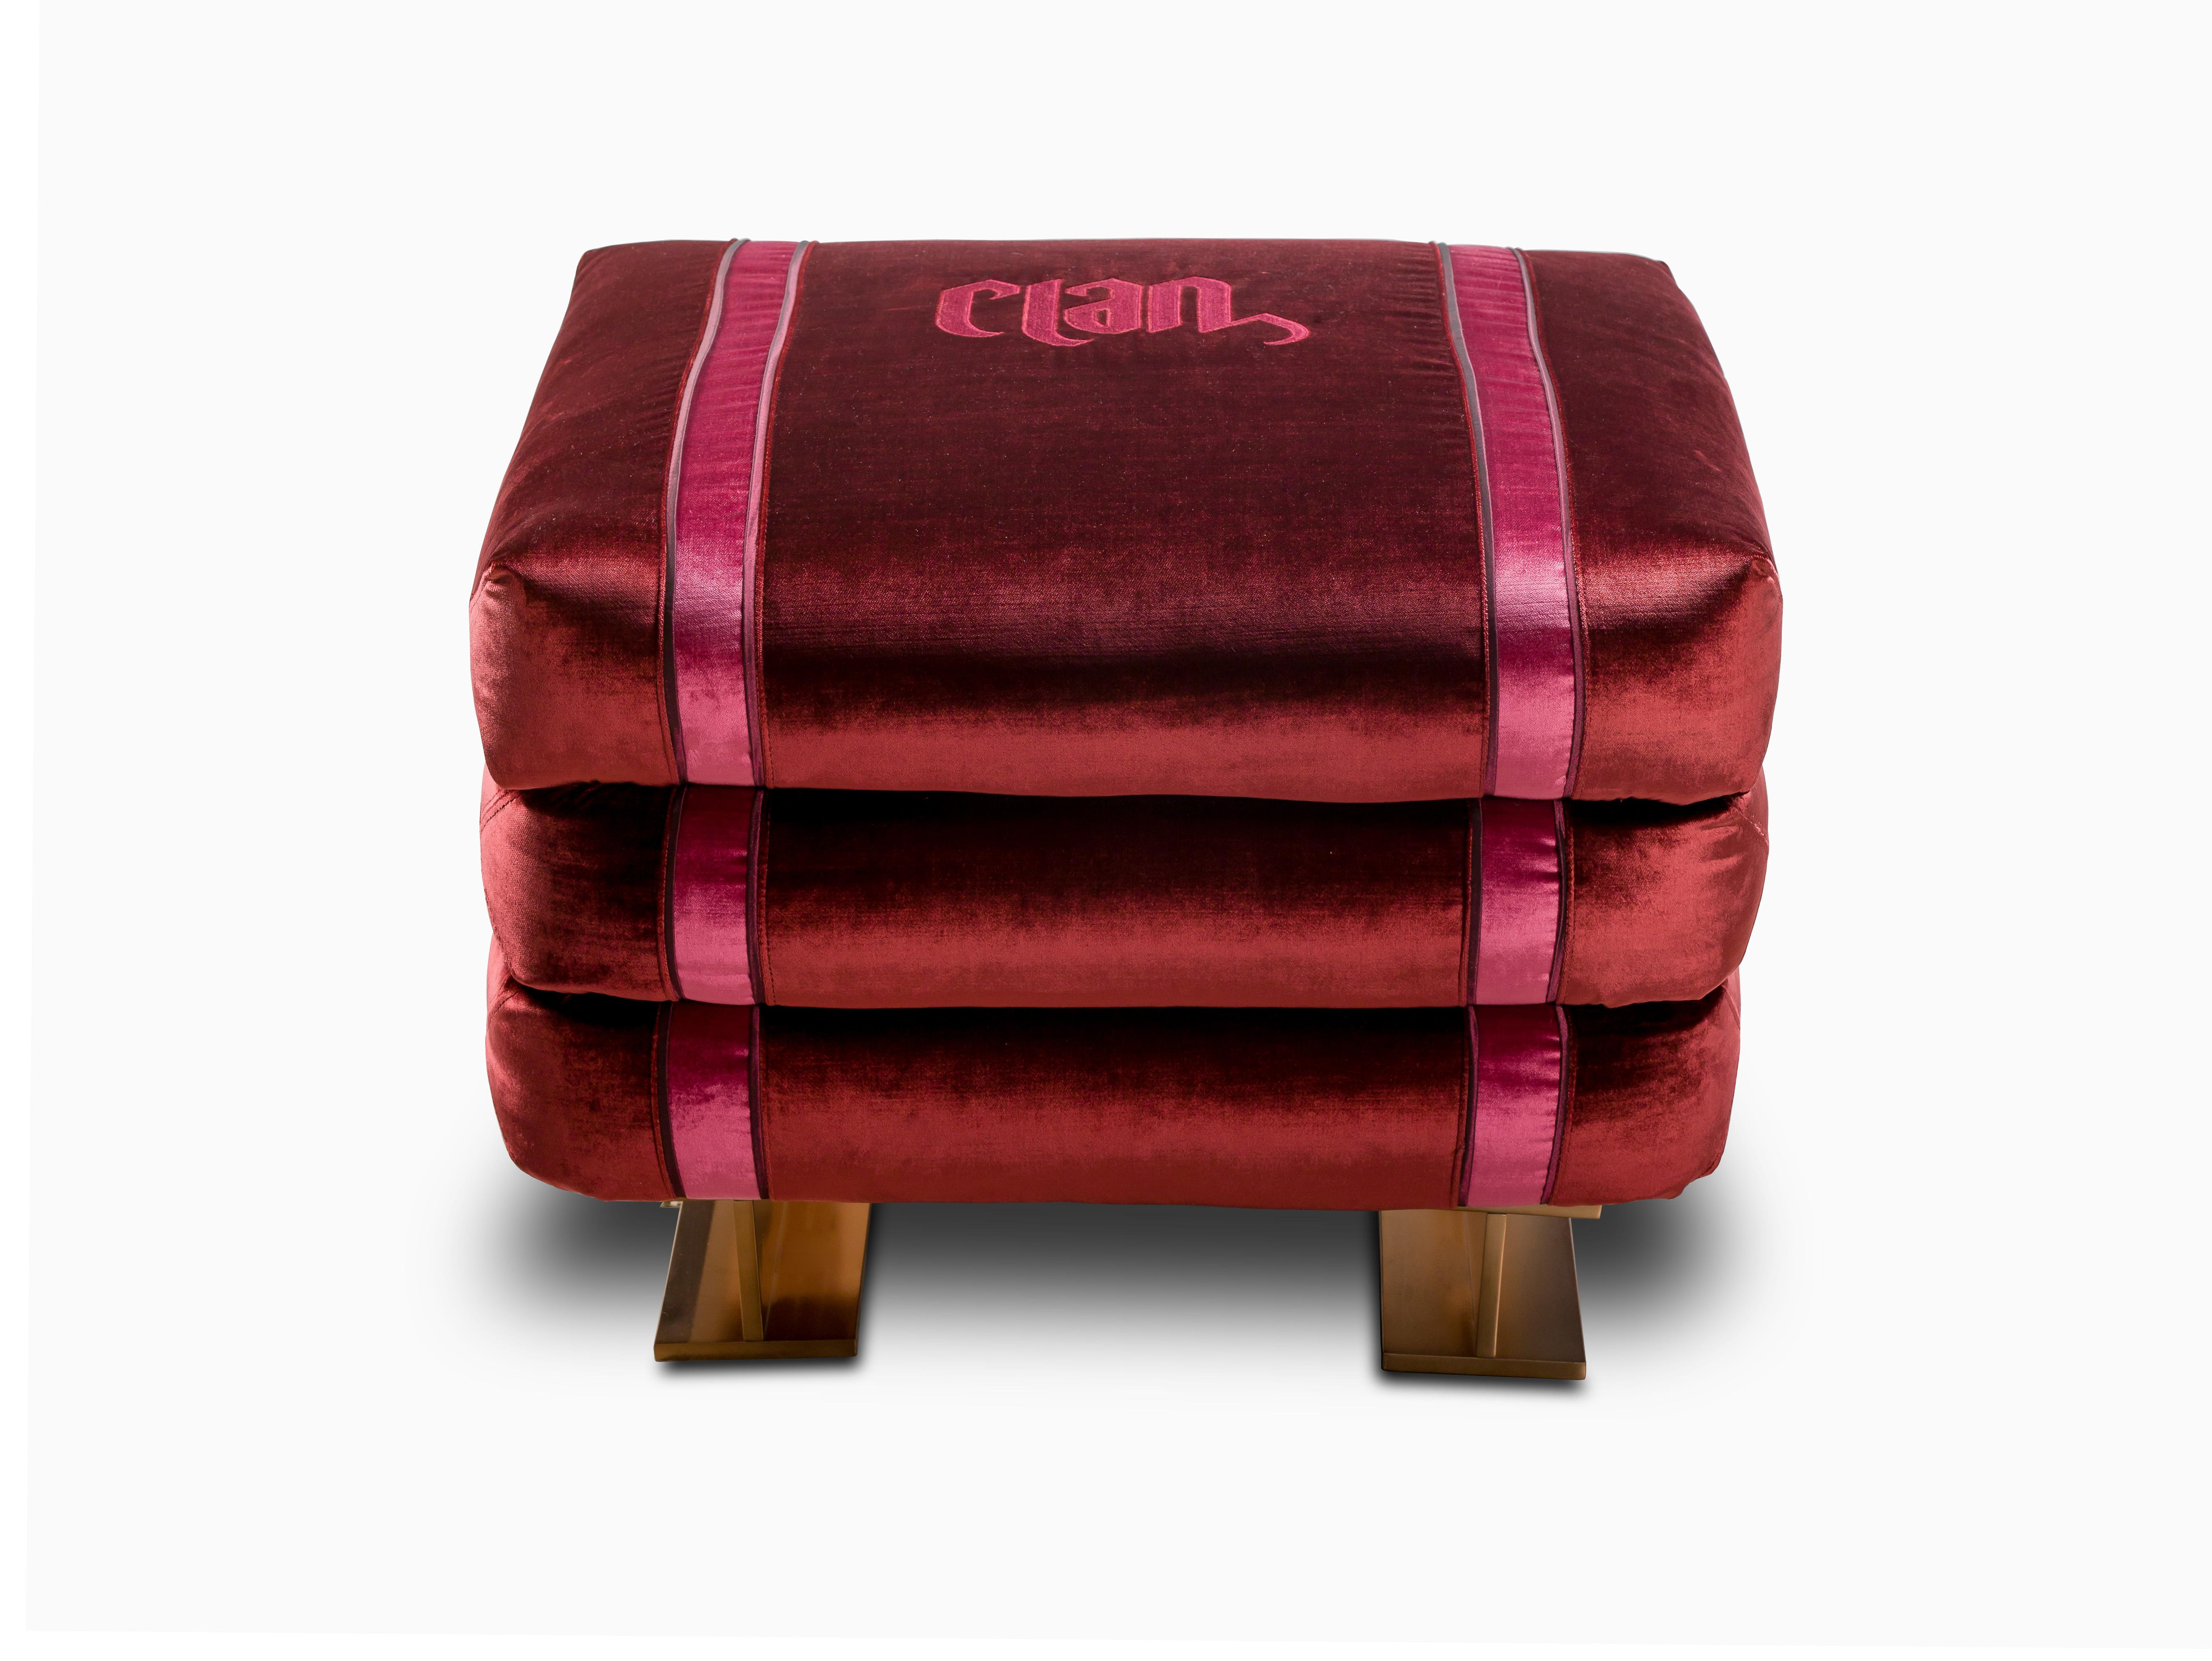 Capsule collection CANTIERE
Daring decor proposals in eclectic forms, where elegant finishes establish a dialogue with details that convey the distinctive industrial atmosphere of a construction site.

SACCO, it is an original pouf inspired by the